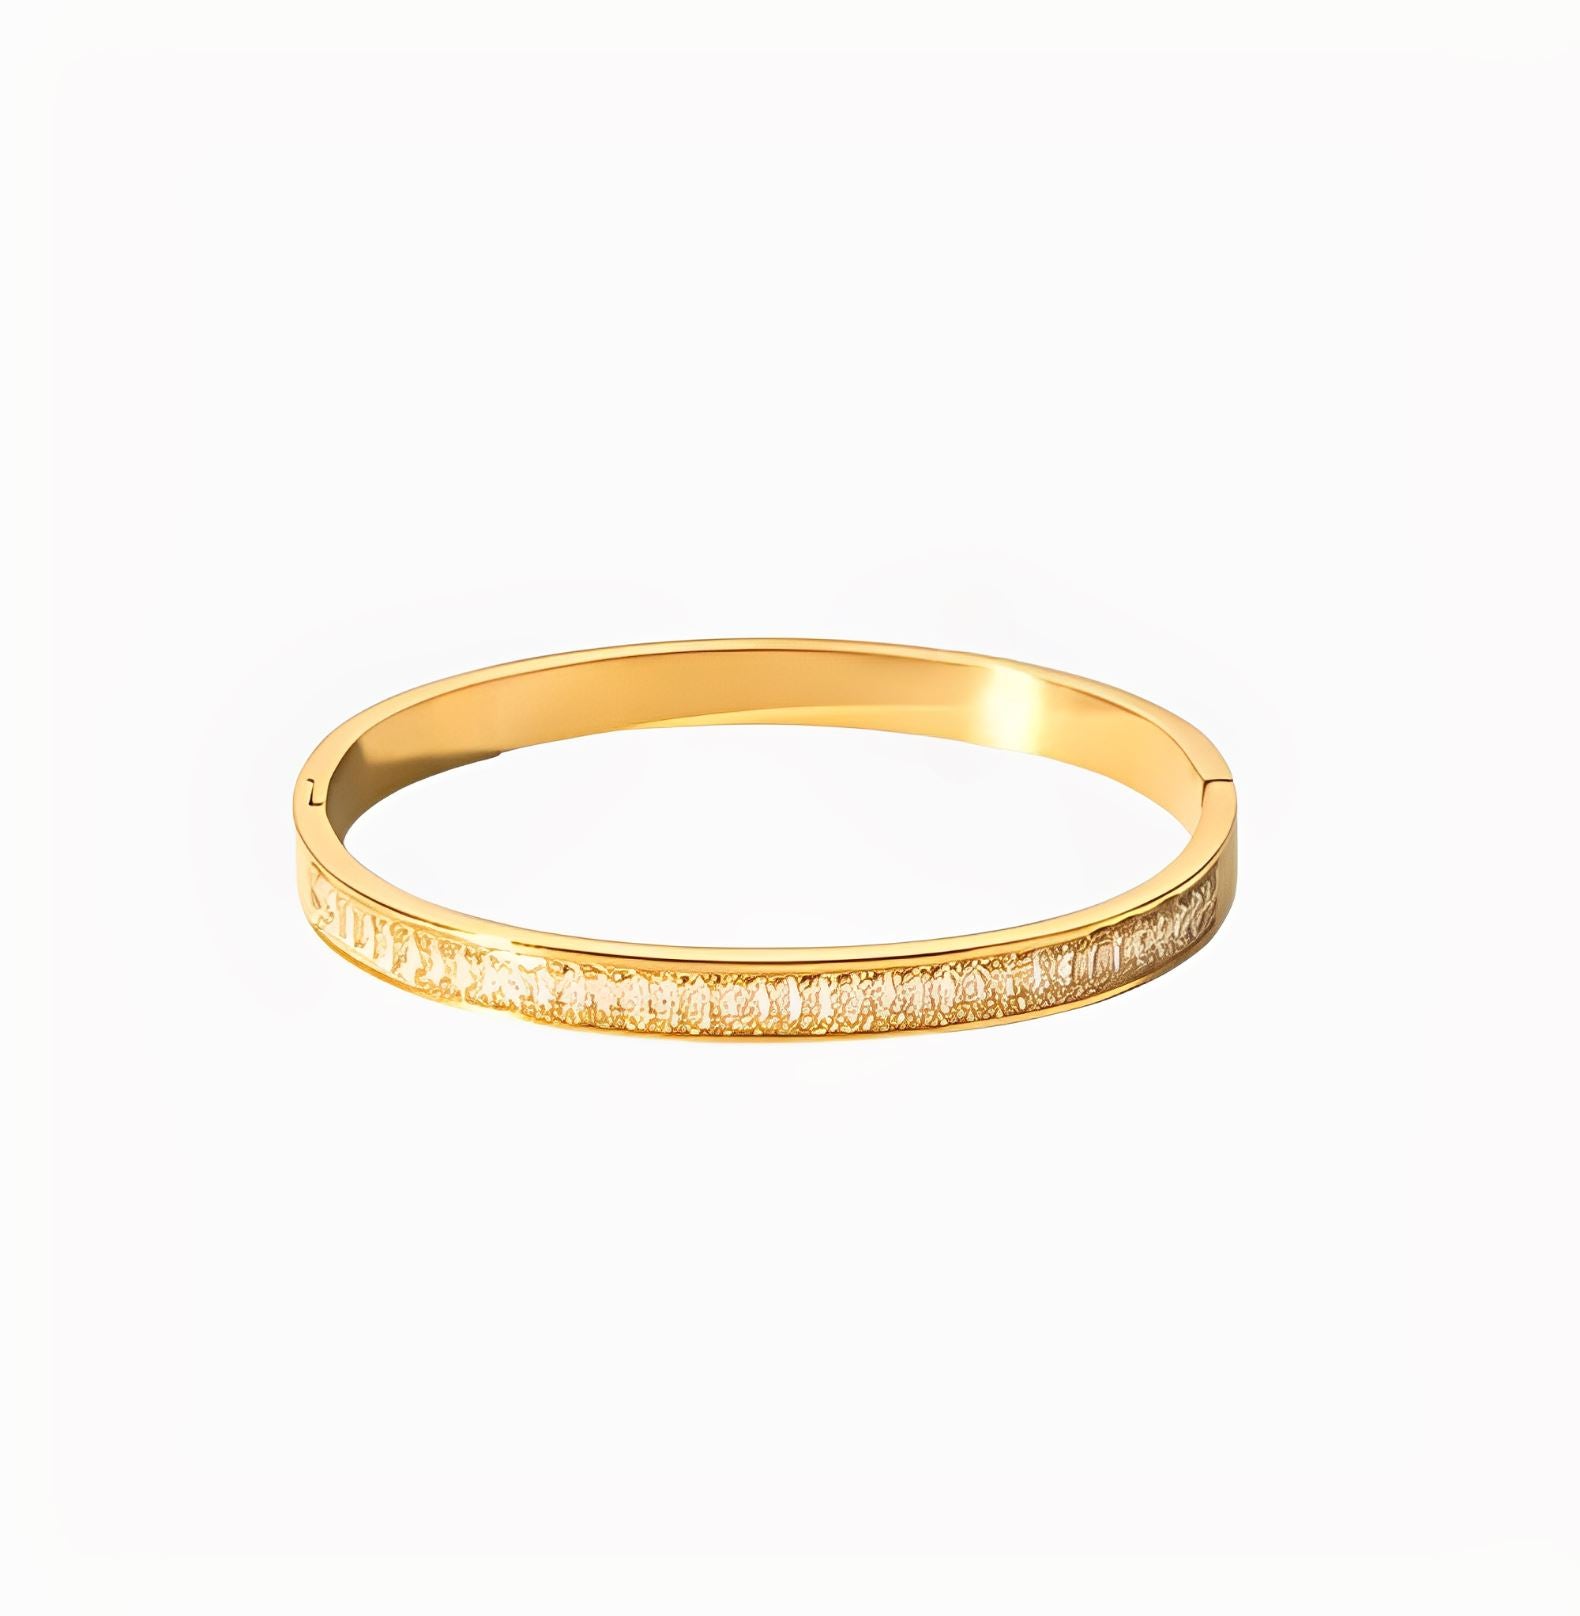 LUXE BANGLE BRACELET braclet Yubama Jewelry Online Store - The Elegant Designs of Gold and Silver ! 